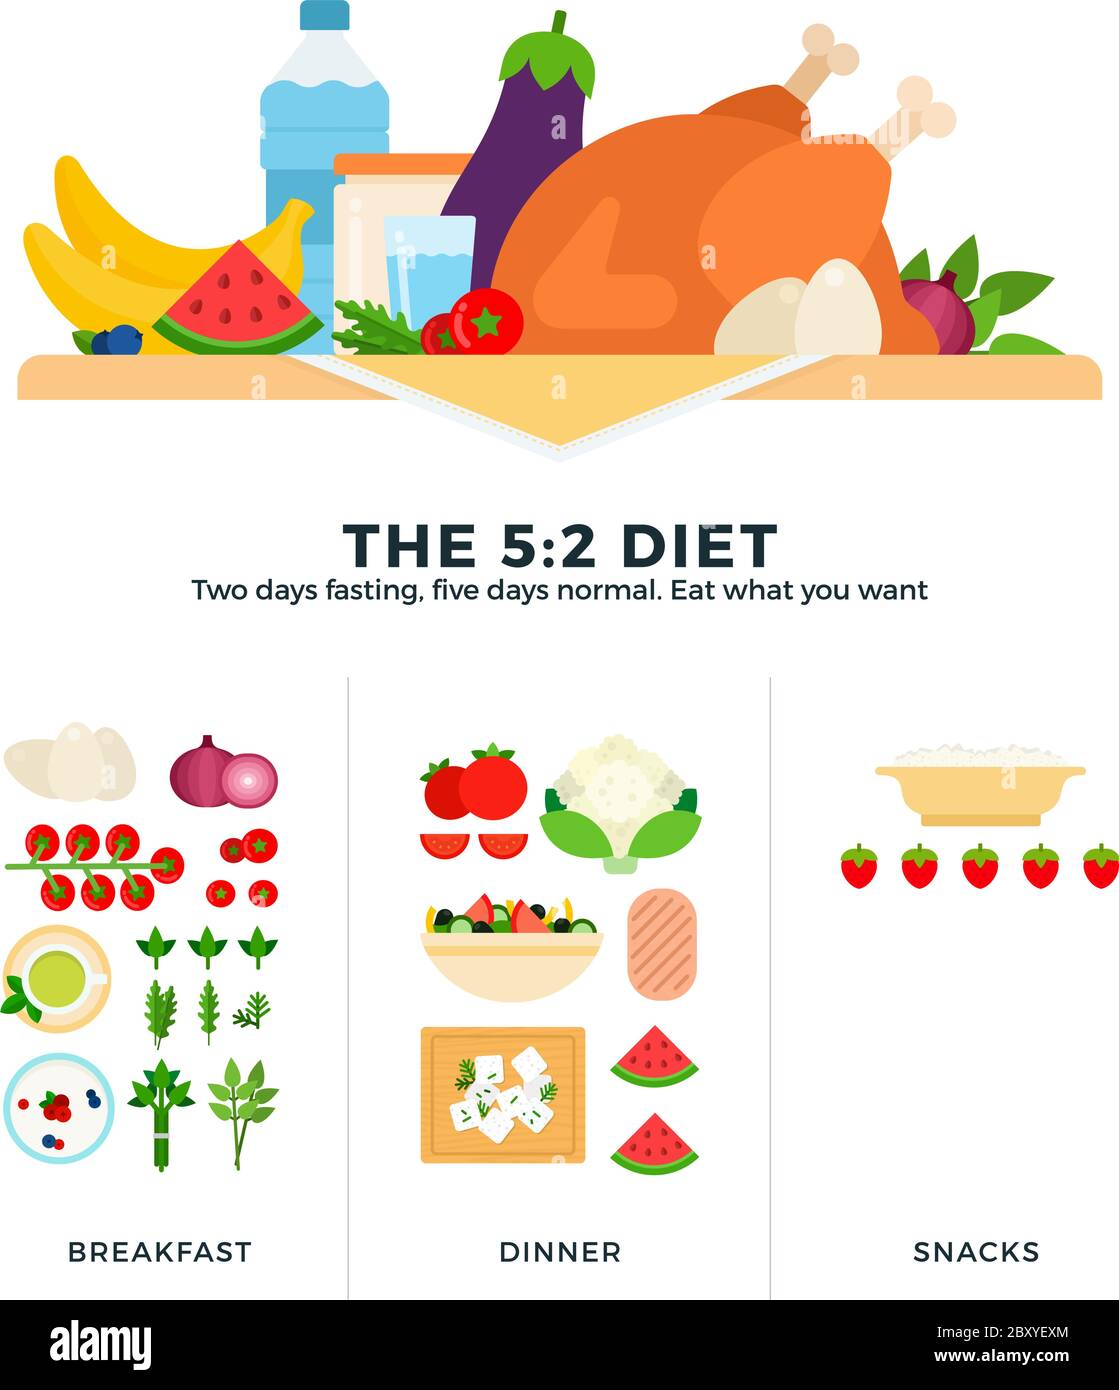 The 5-2 diet flat vector illustrations. The diet of two days fasting, then five days normal eating. Healthy nutrition. Stock Vector